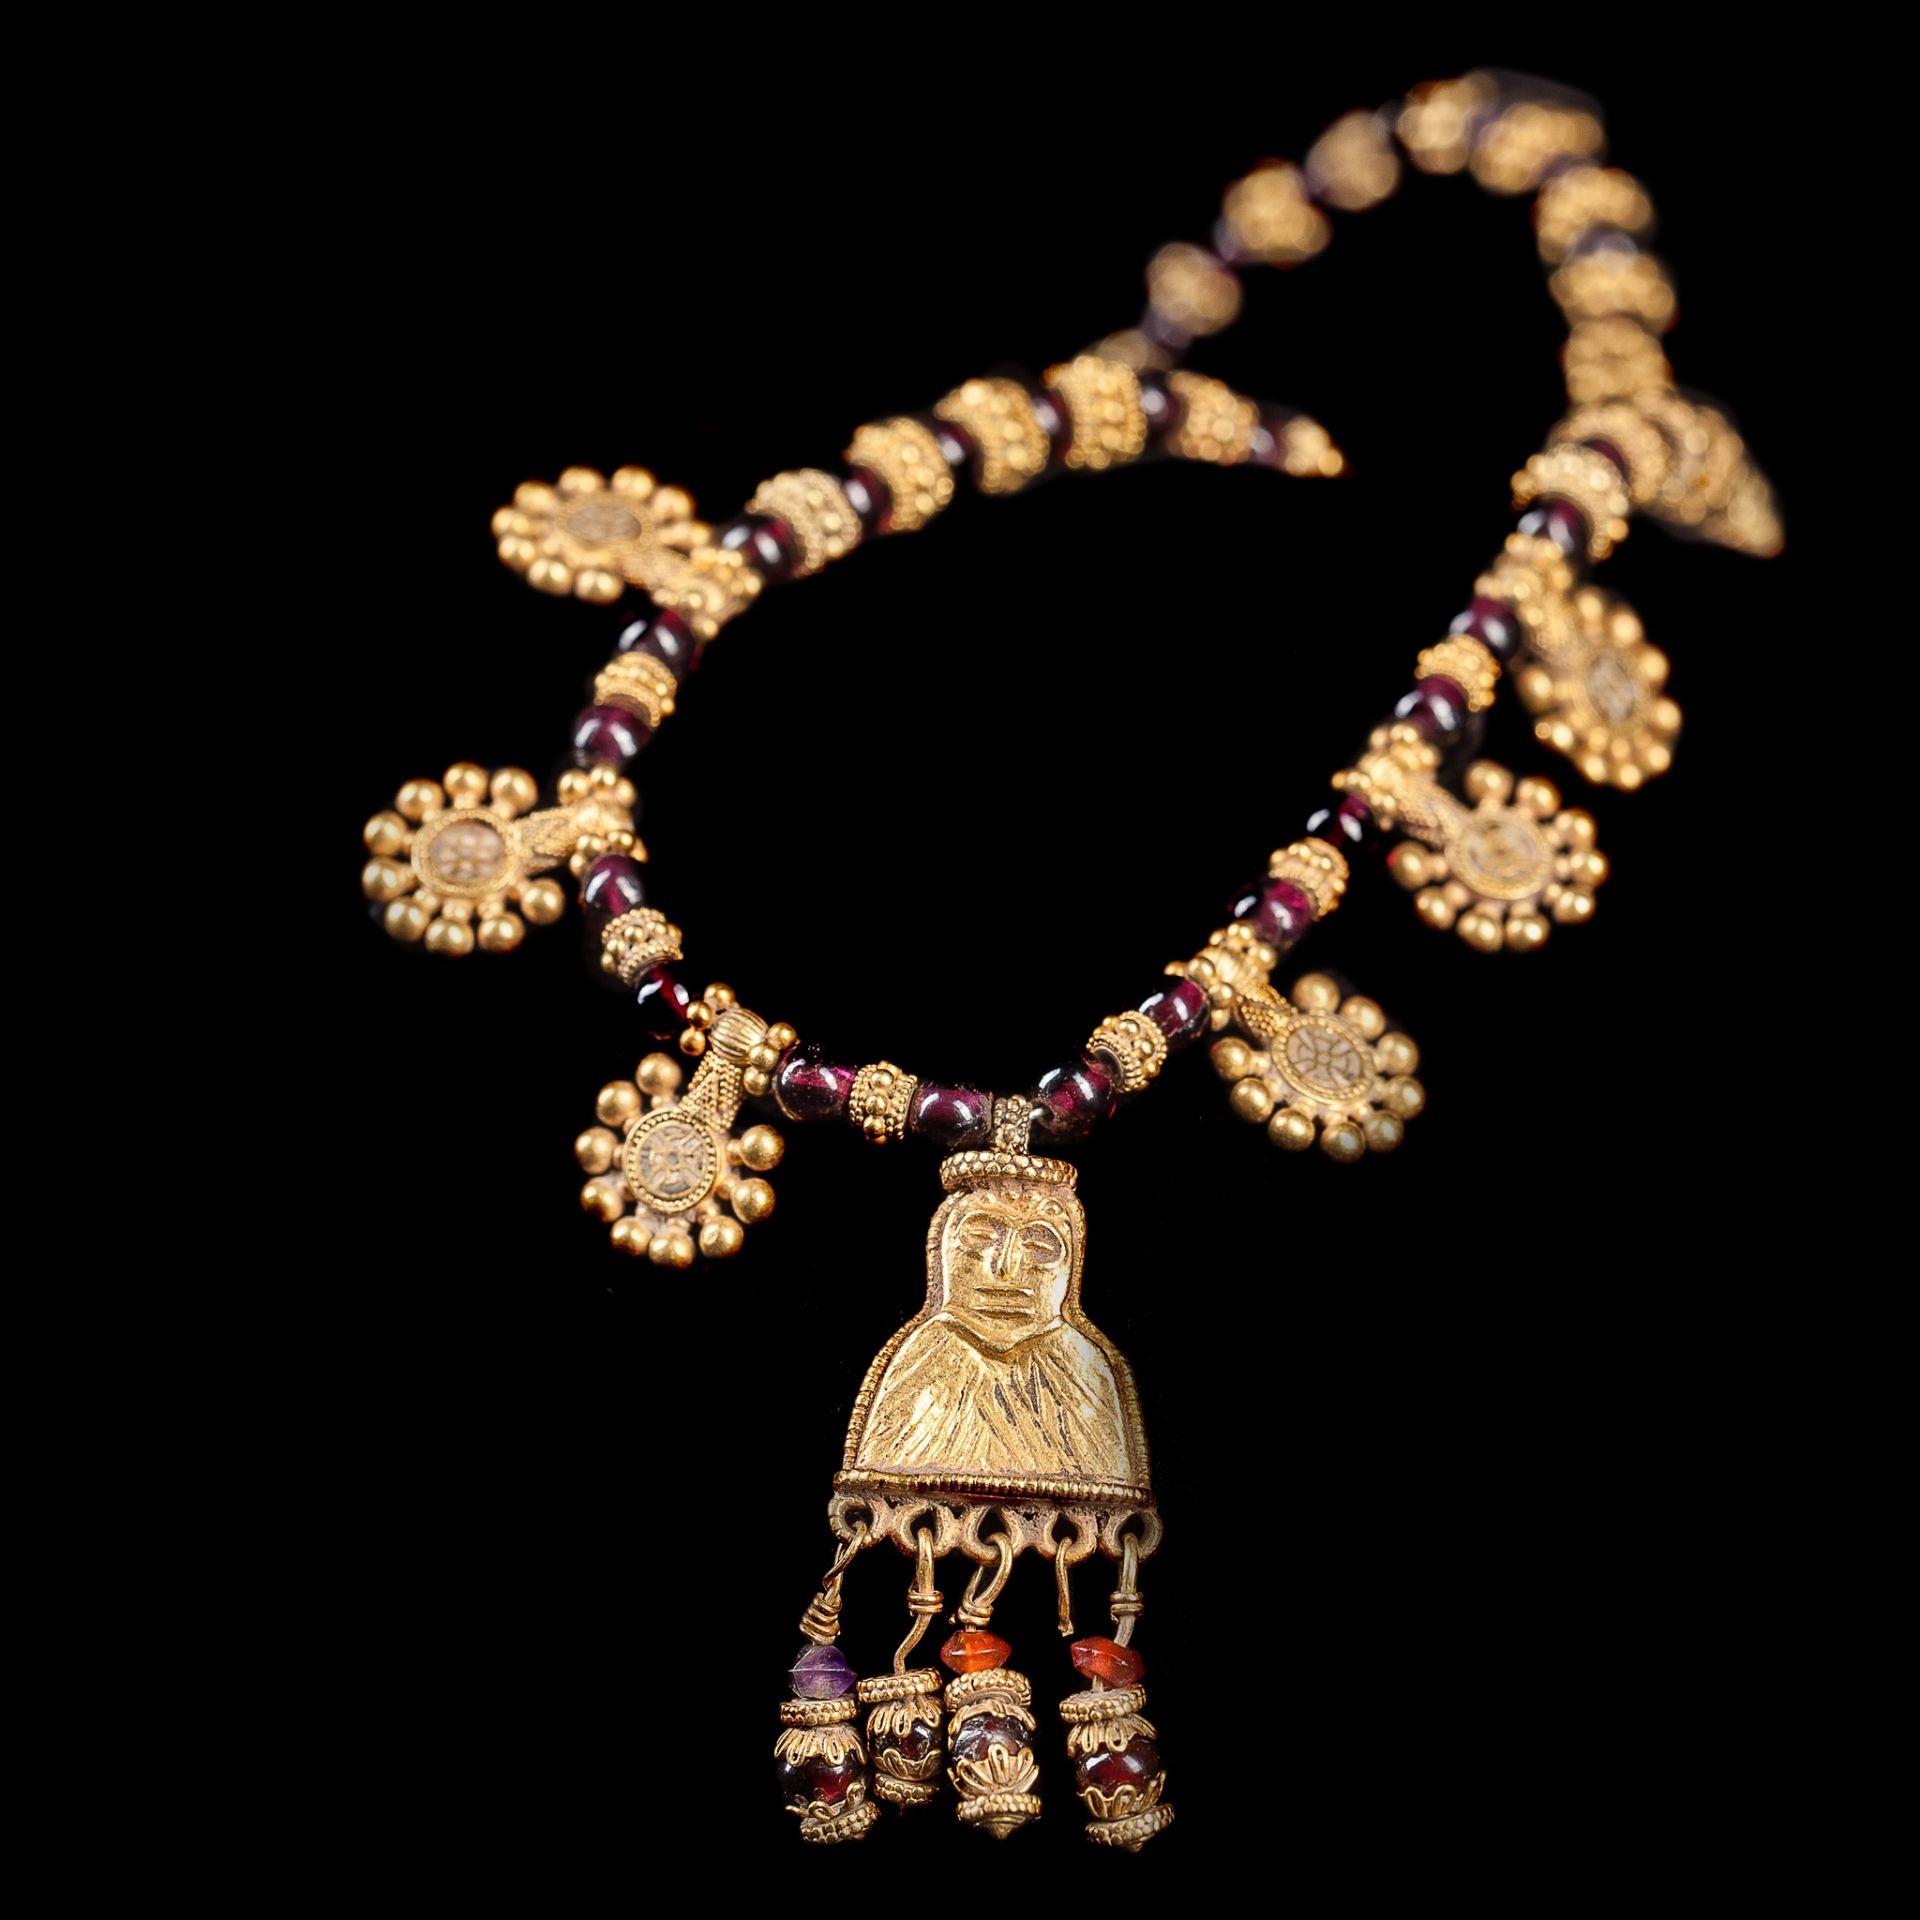 ANCIENT ARABIAN GOLD NECKLACE WITH FEMALE FIGURE PENDANT, LIKELY SABEAN SOUTHERN ARABIA, C. 5TH - - Image 2 of 2